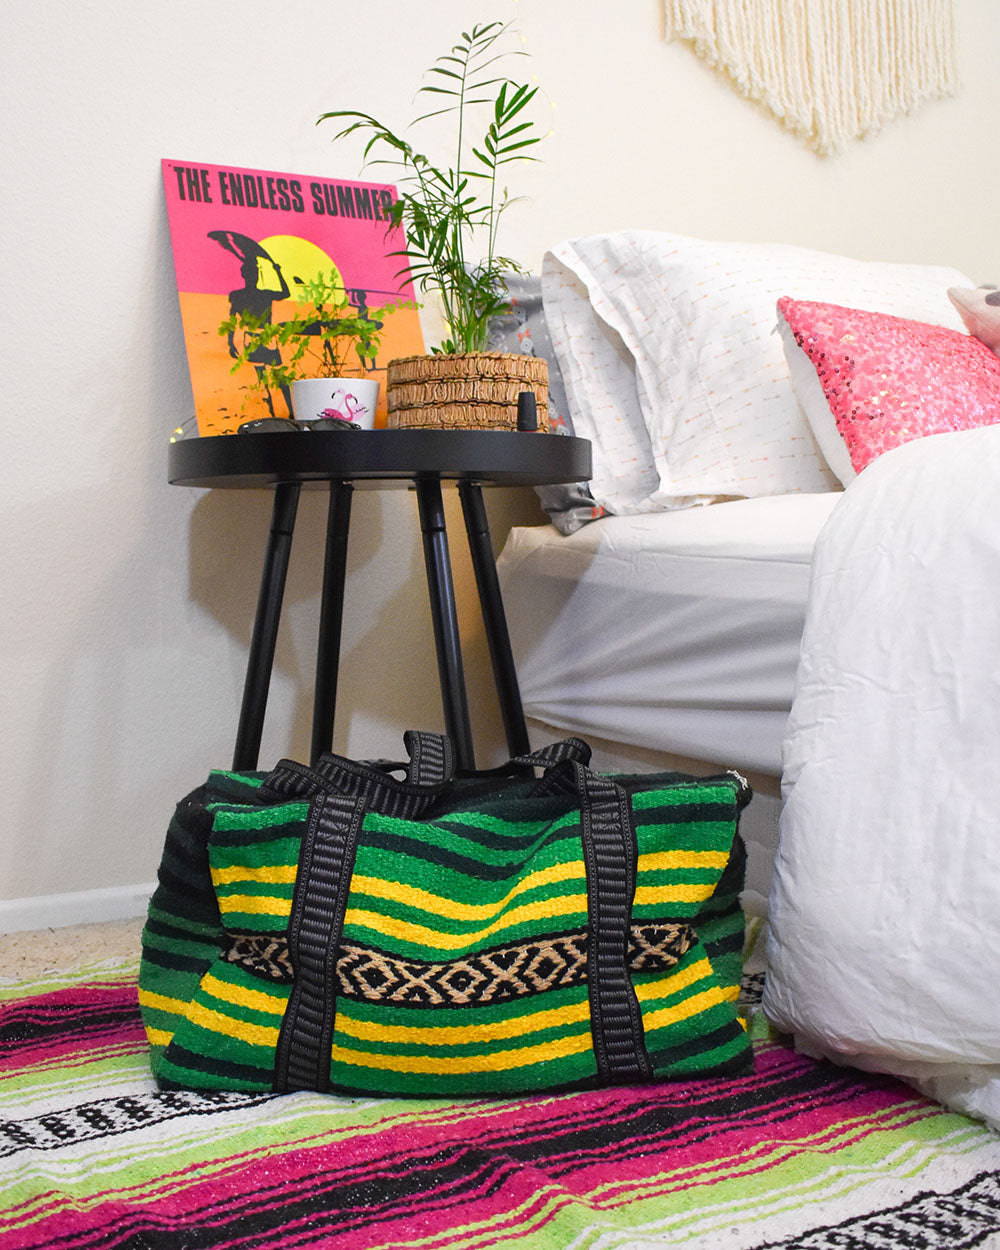 Wanderlust Must Haves - The Wanderlust Weekender Bag. Get ready to pack your bags for weekend adventure or an overnight sleep over.